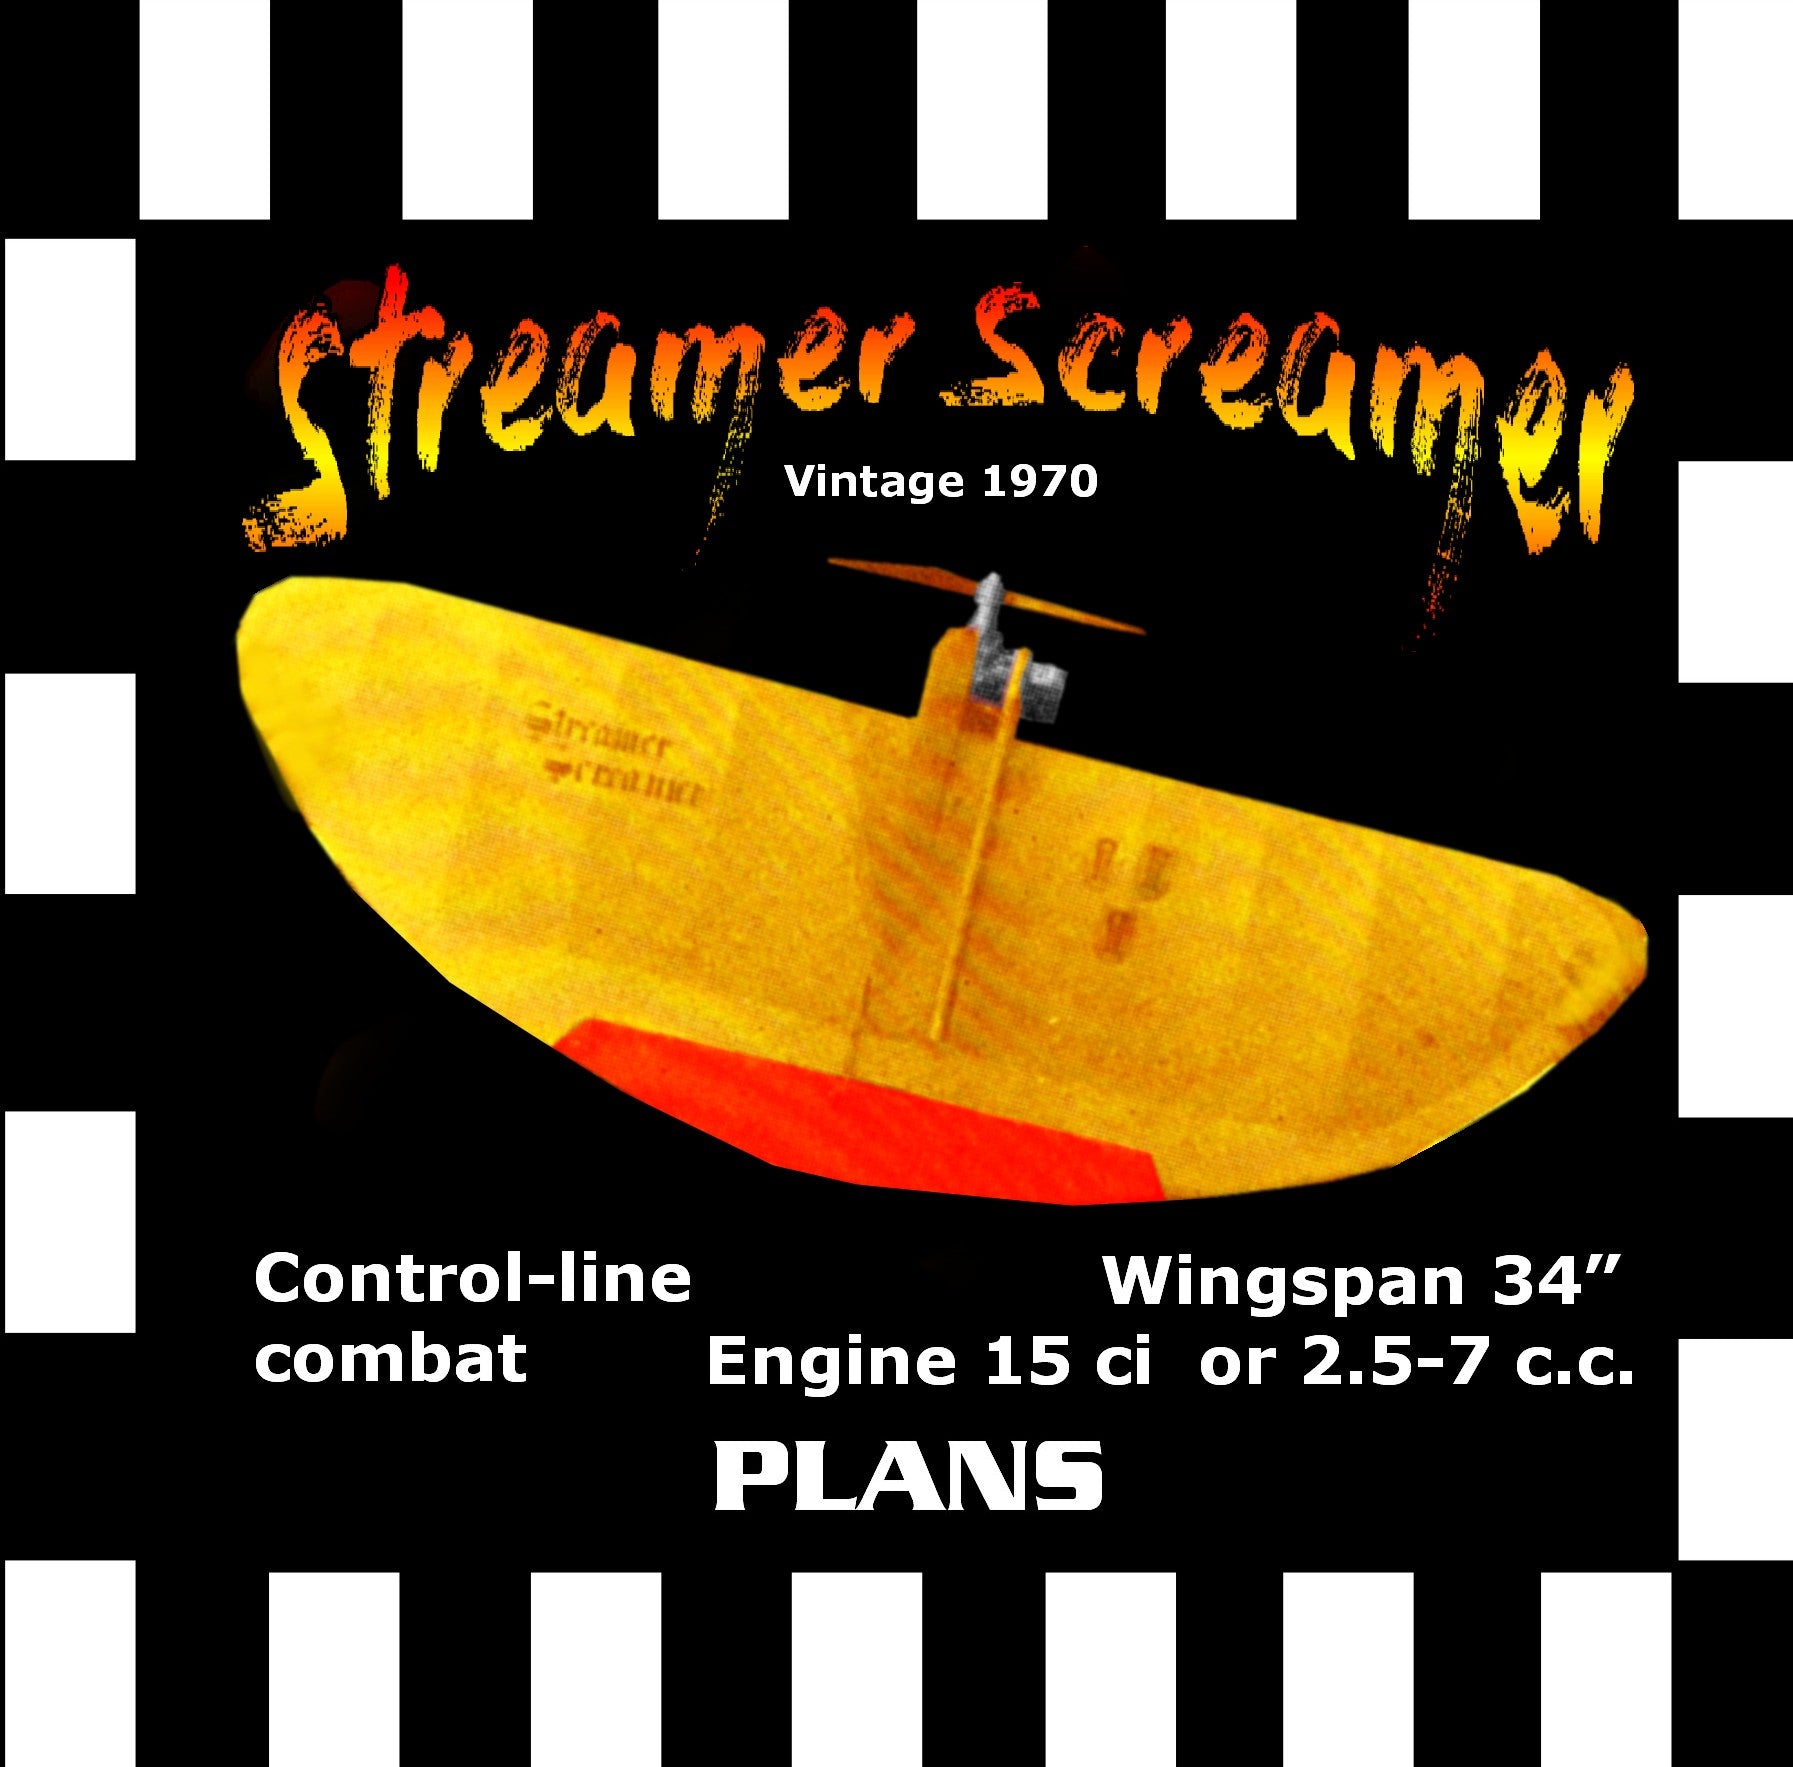 full size printed plans vintage 1970 control-line combat or sports flying "streamer screamer" great trainer